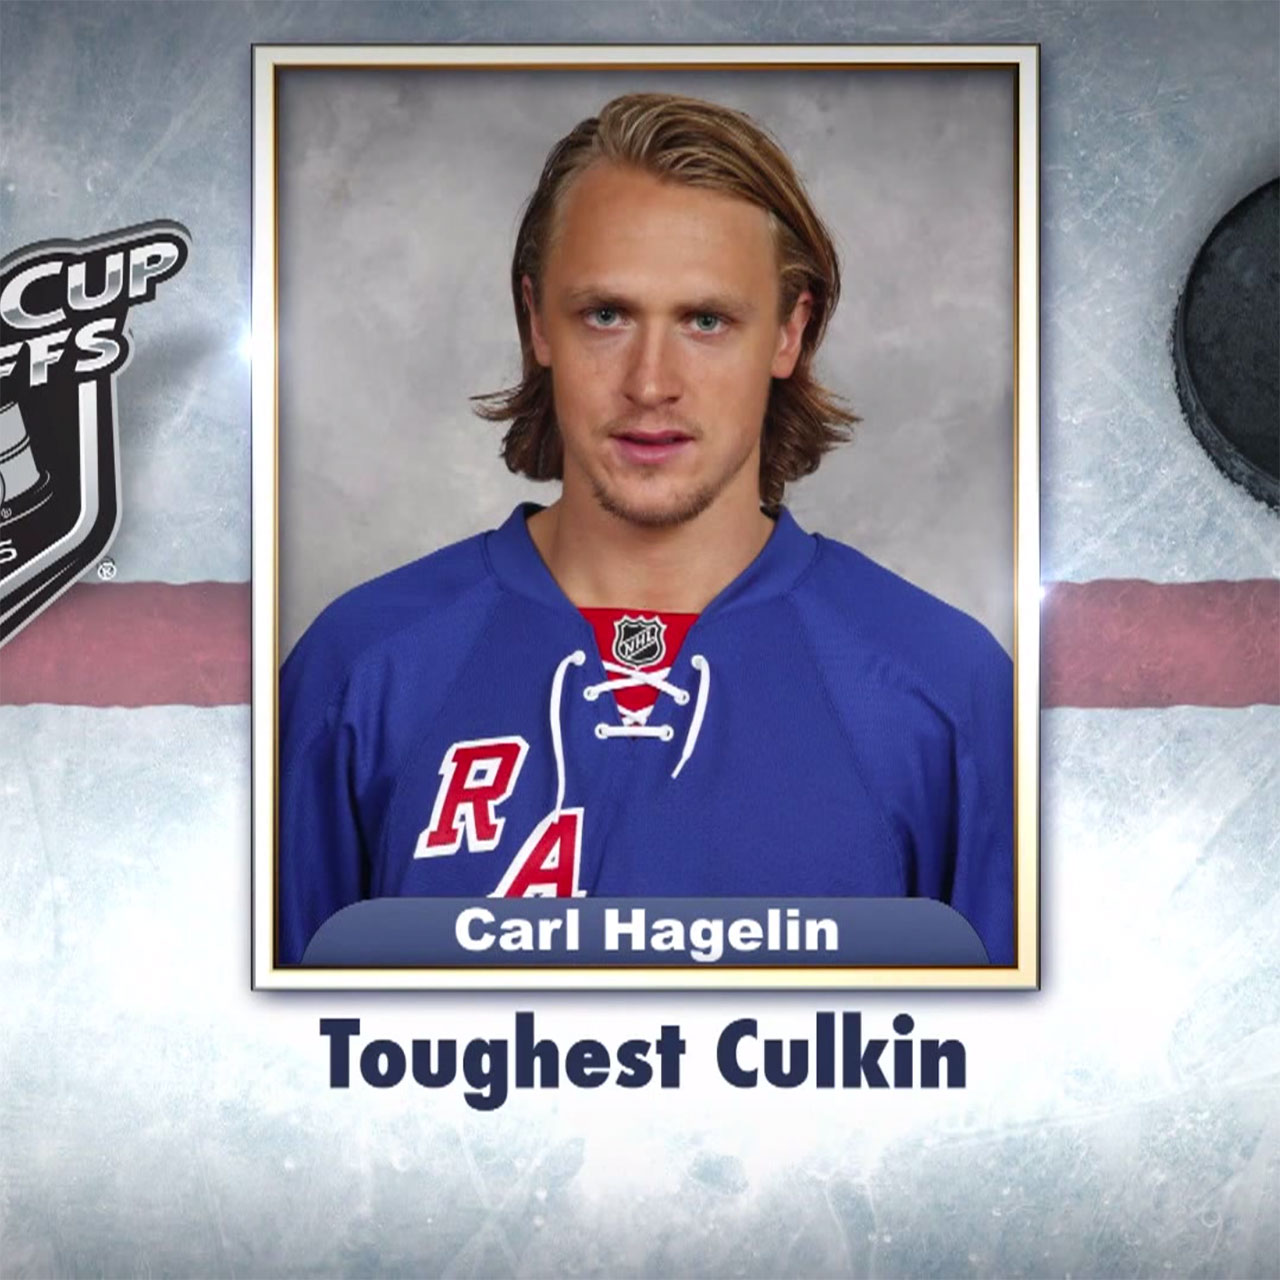 NY Rangers winger Carl Hagelin is the "Toughest Culkin" of all